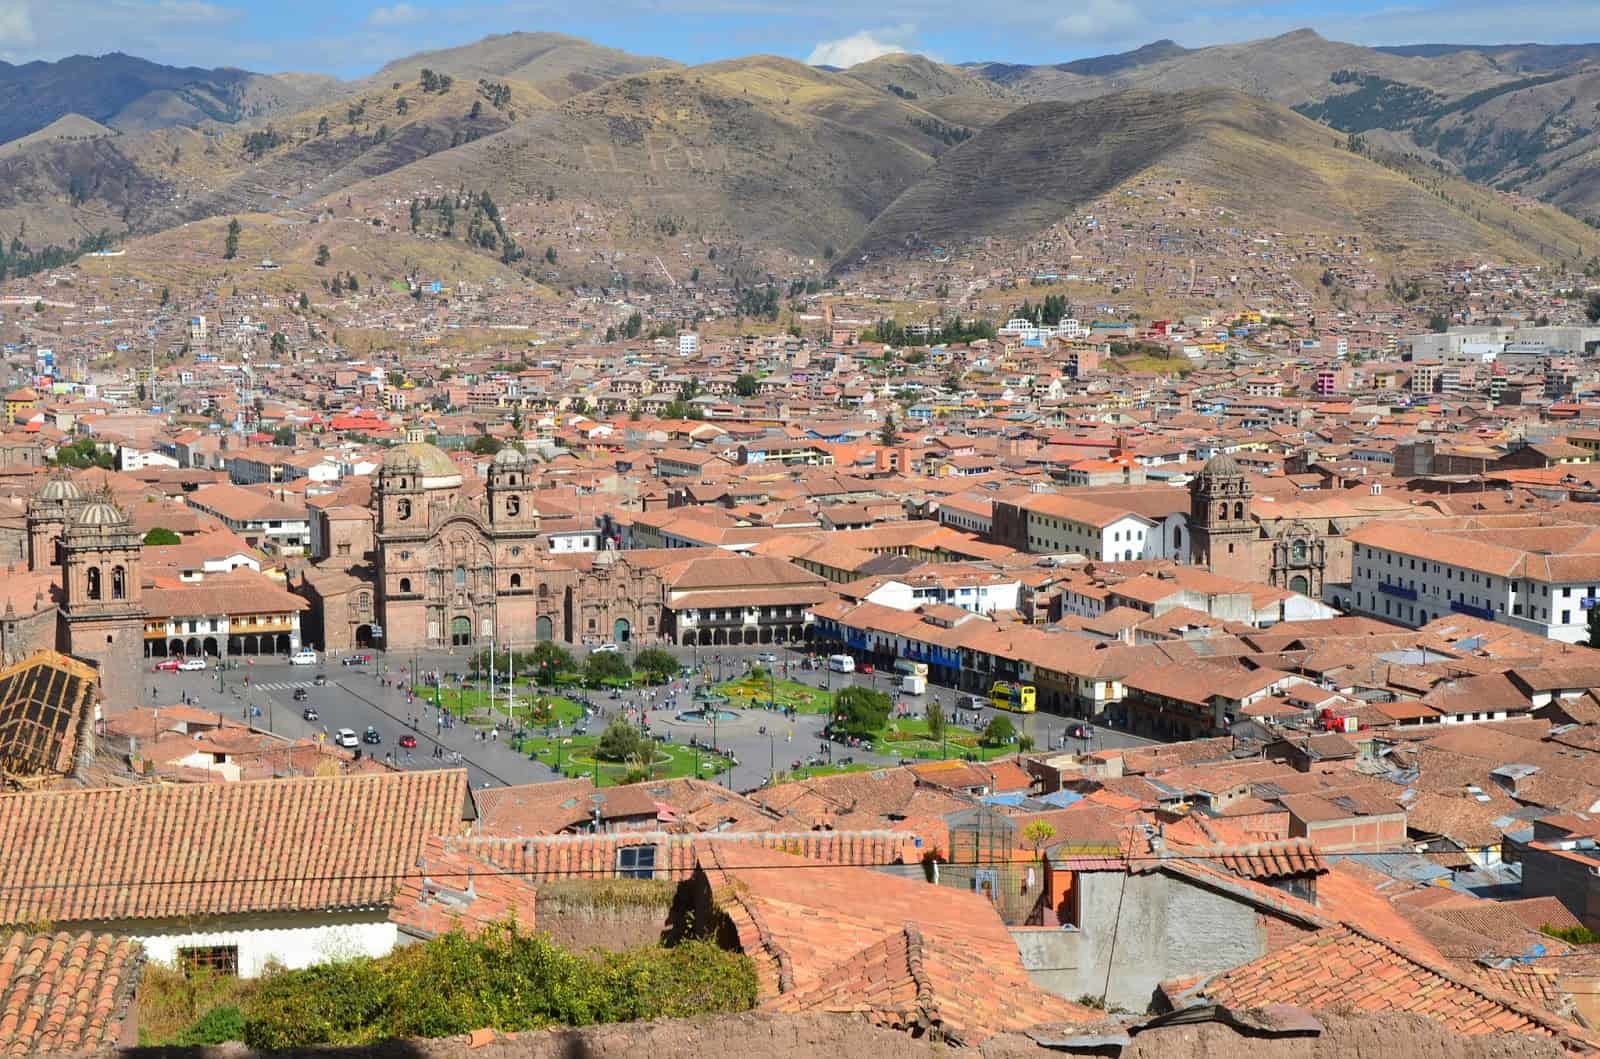 View from the Church of San Cristóbal bell tower in Cusco, Peru